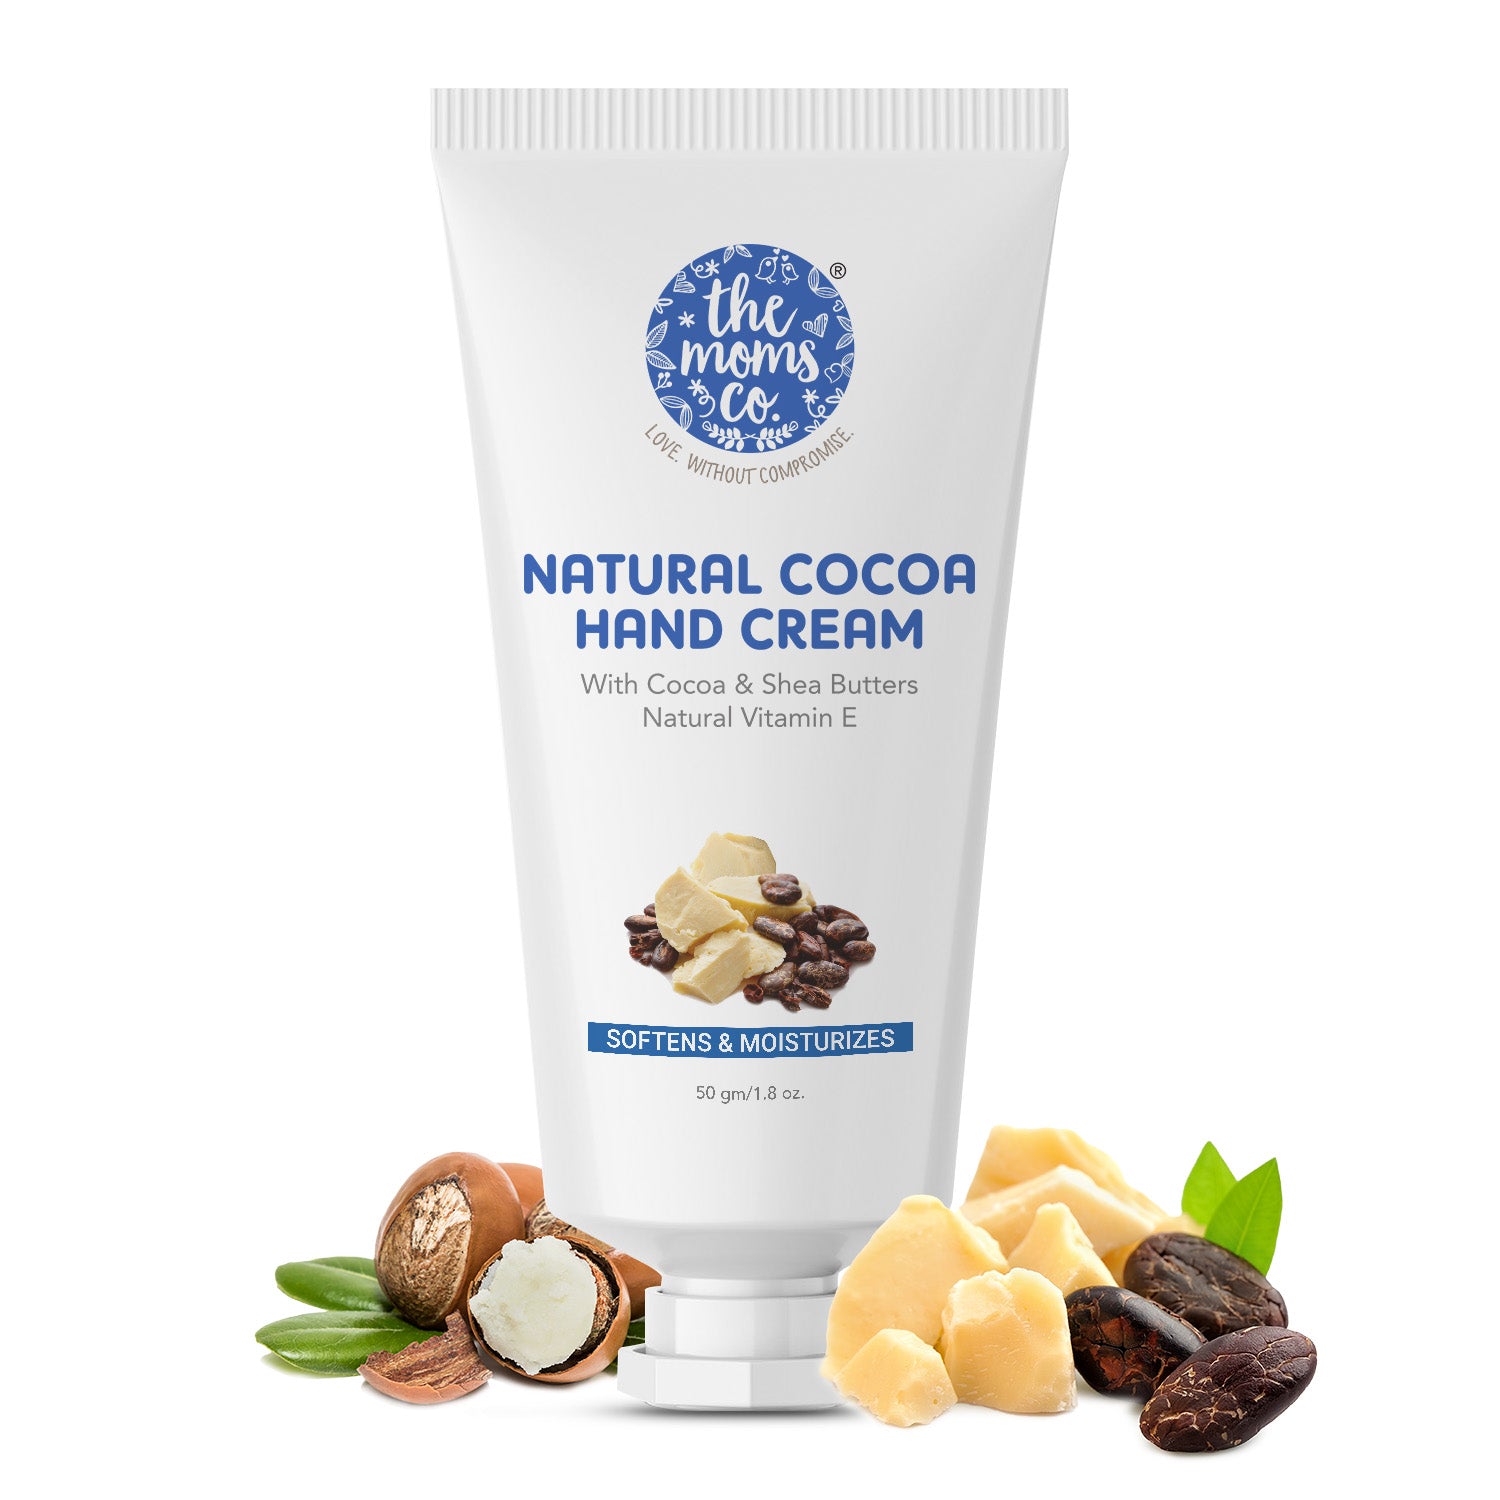 The Moms Co. Natural Cocoa Hand Cream for Women & Men 50g for Dry and Rough Hands | With Cocoa, Shea Butters & Vitamin E for Intense Moisturization